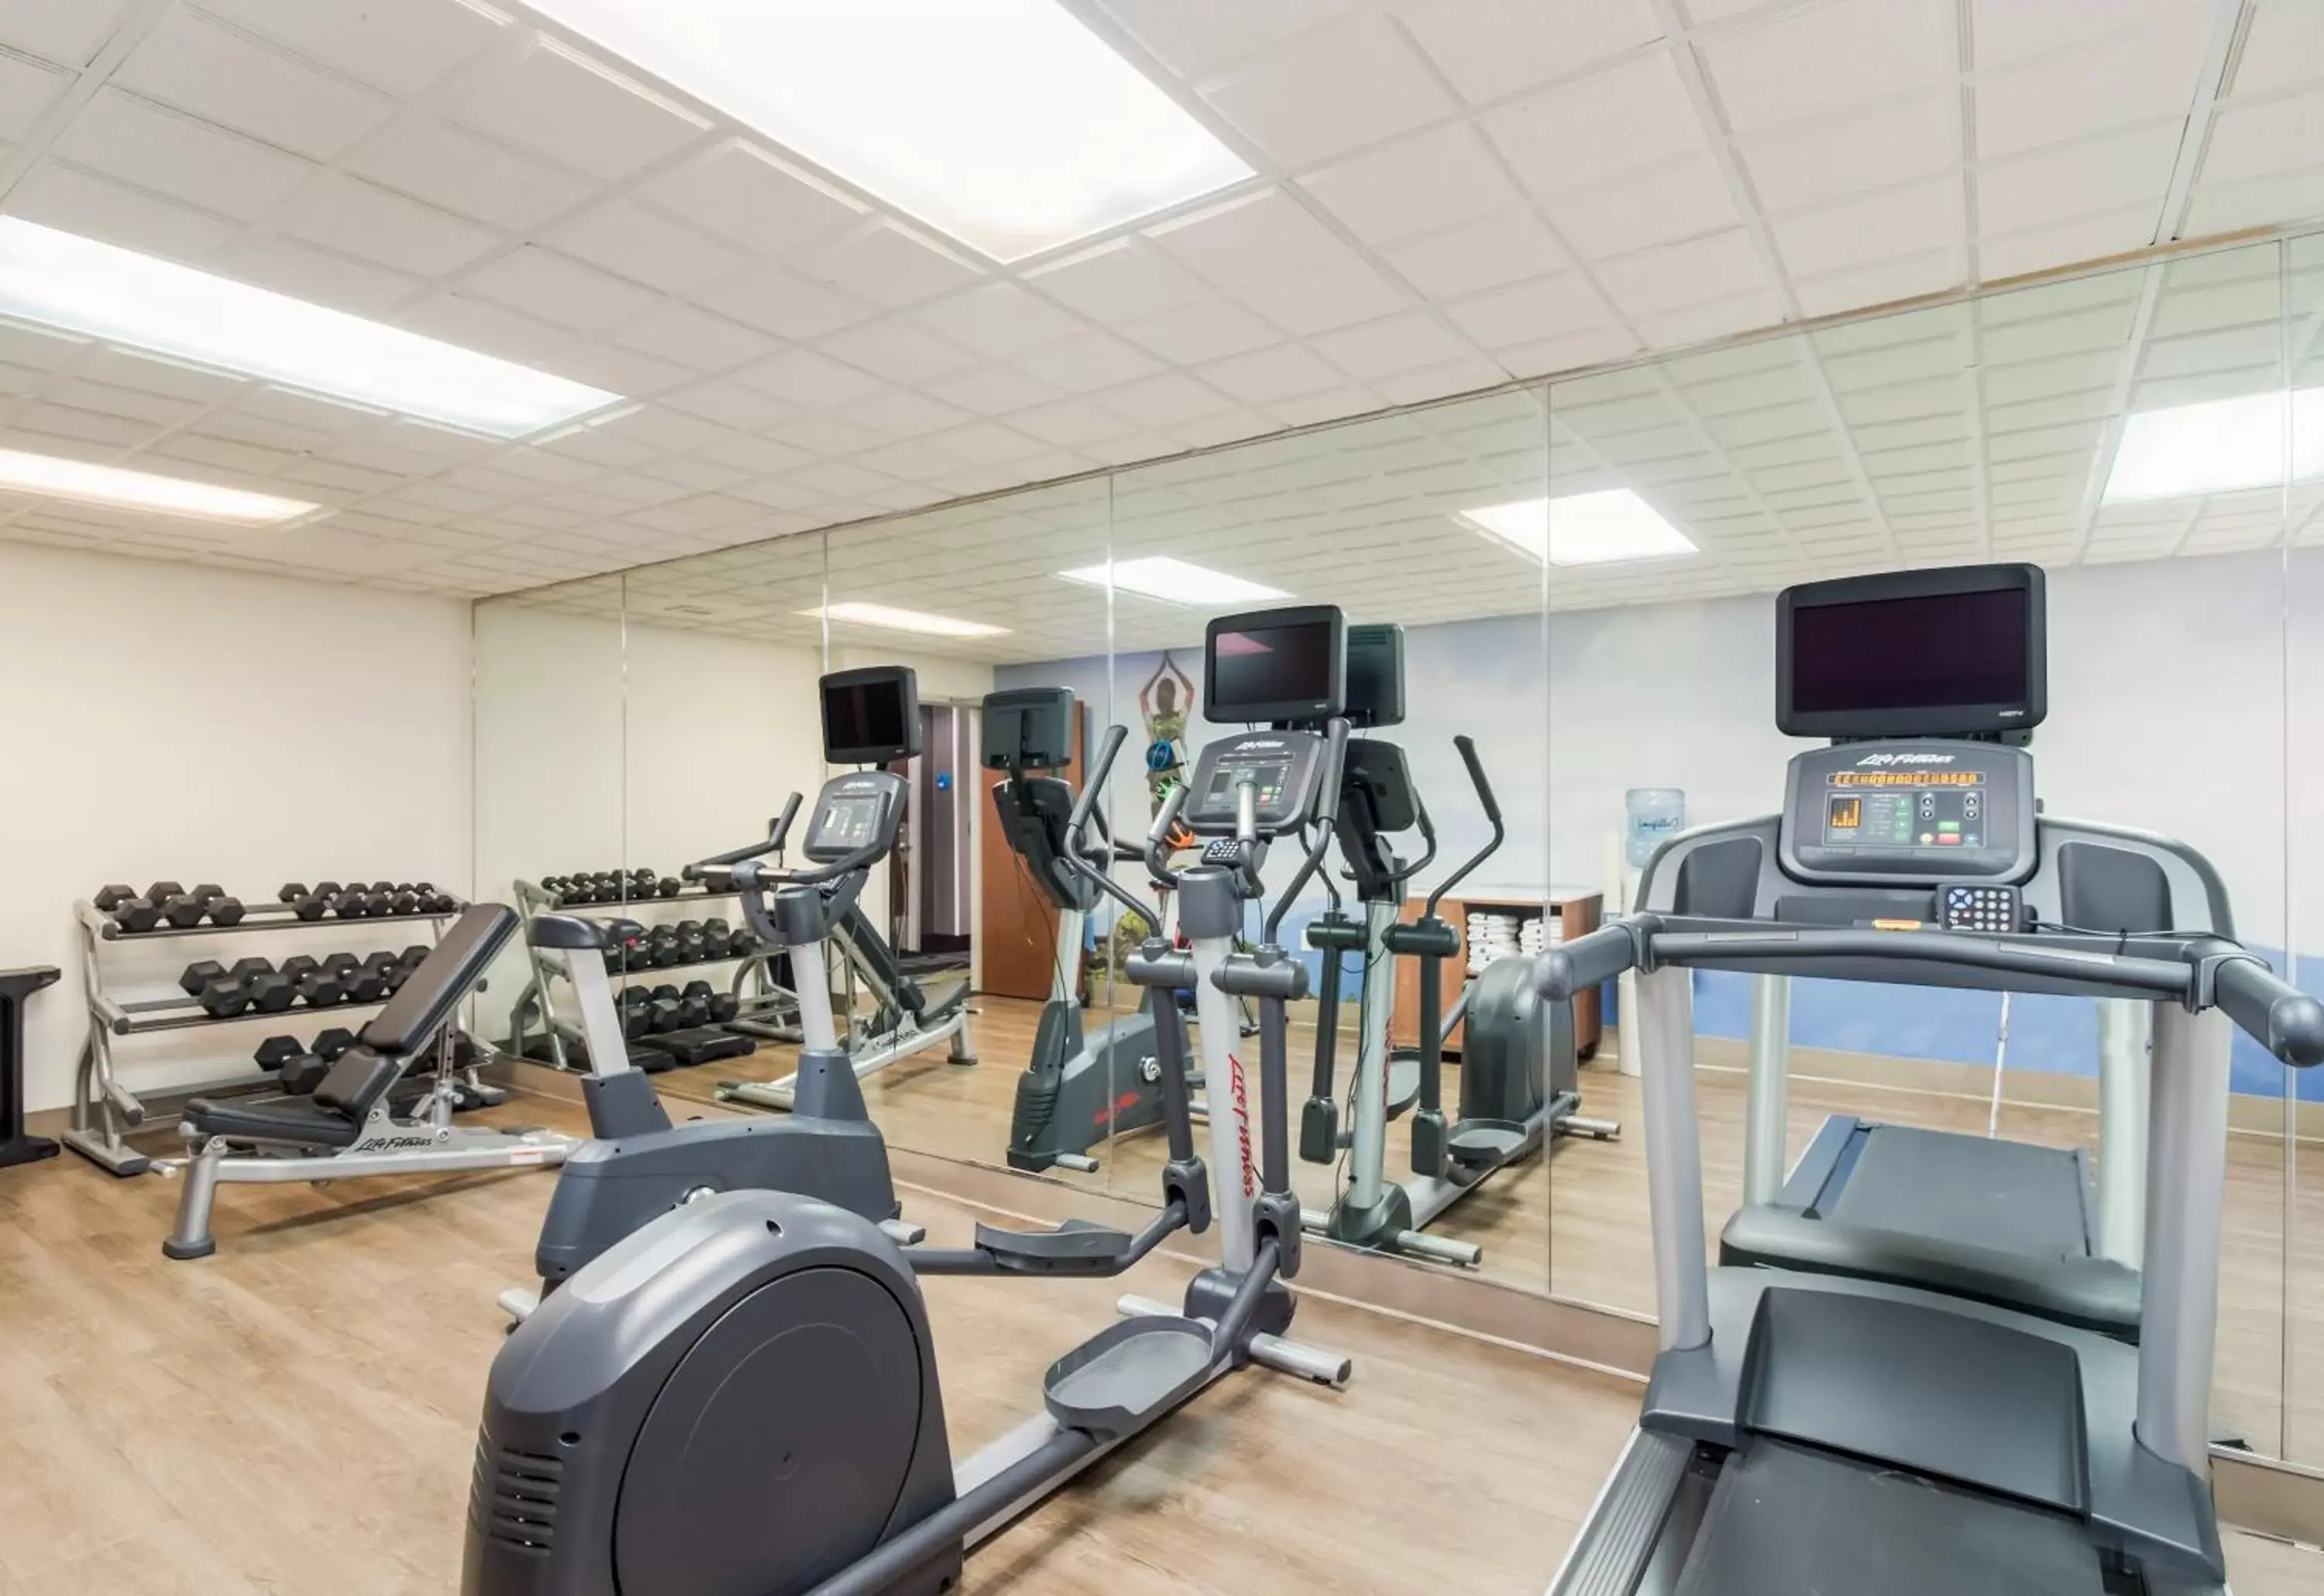 Fitness centre/facilities, Fitness Center/Facilities in Clarion Pointe New Bern